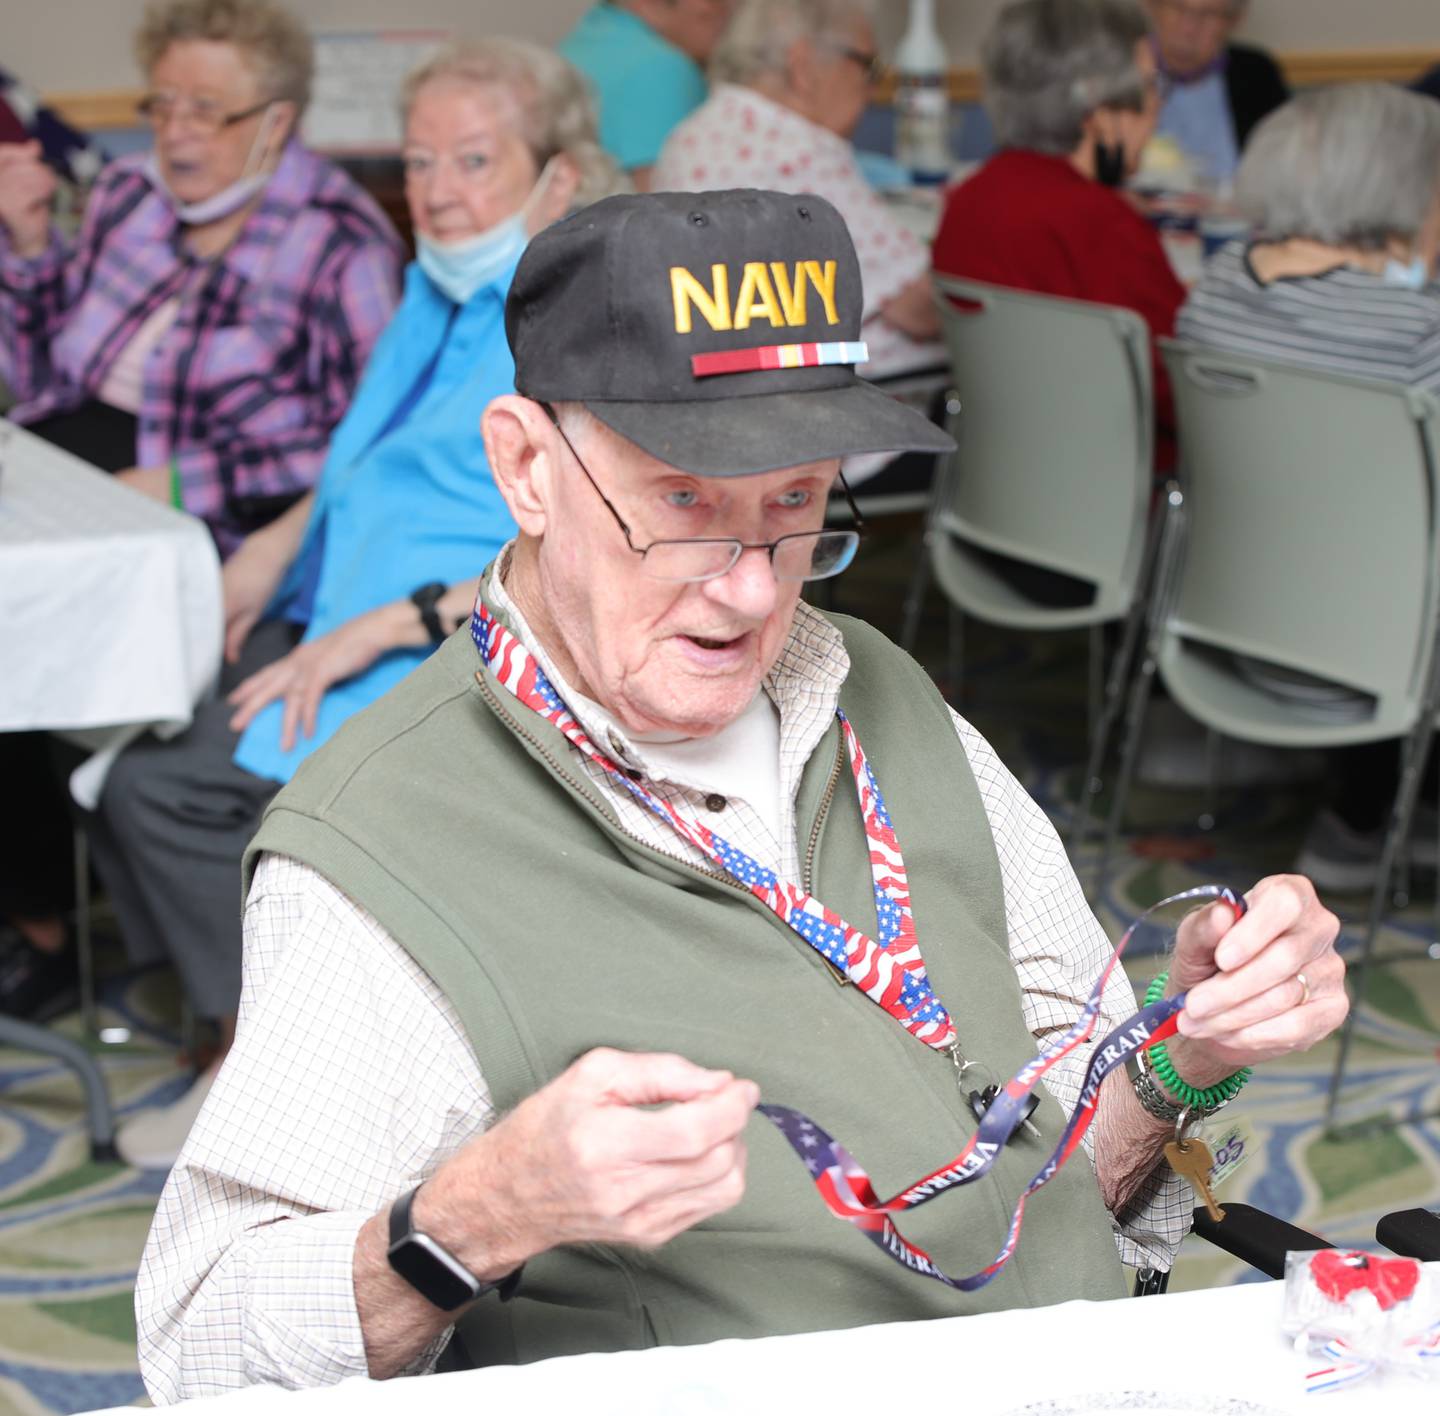 Timbers of Shorewood resident, John Dixon, a U.S. Navy Veteran, opens a goodie bag from the Timbers of Shorewood’s Veterans Day celebration on Friday, November 11, 2022.